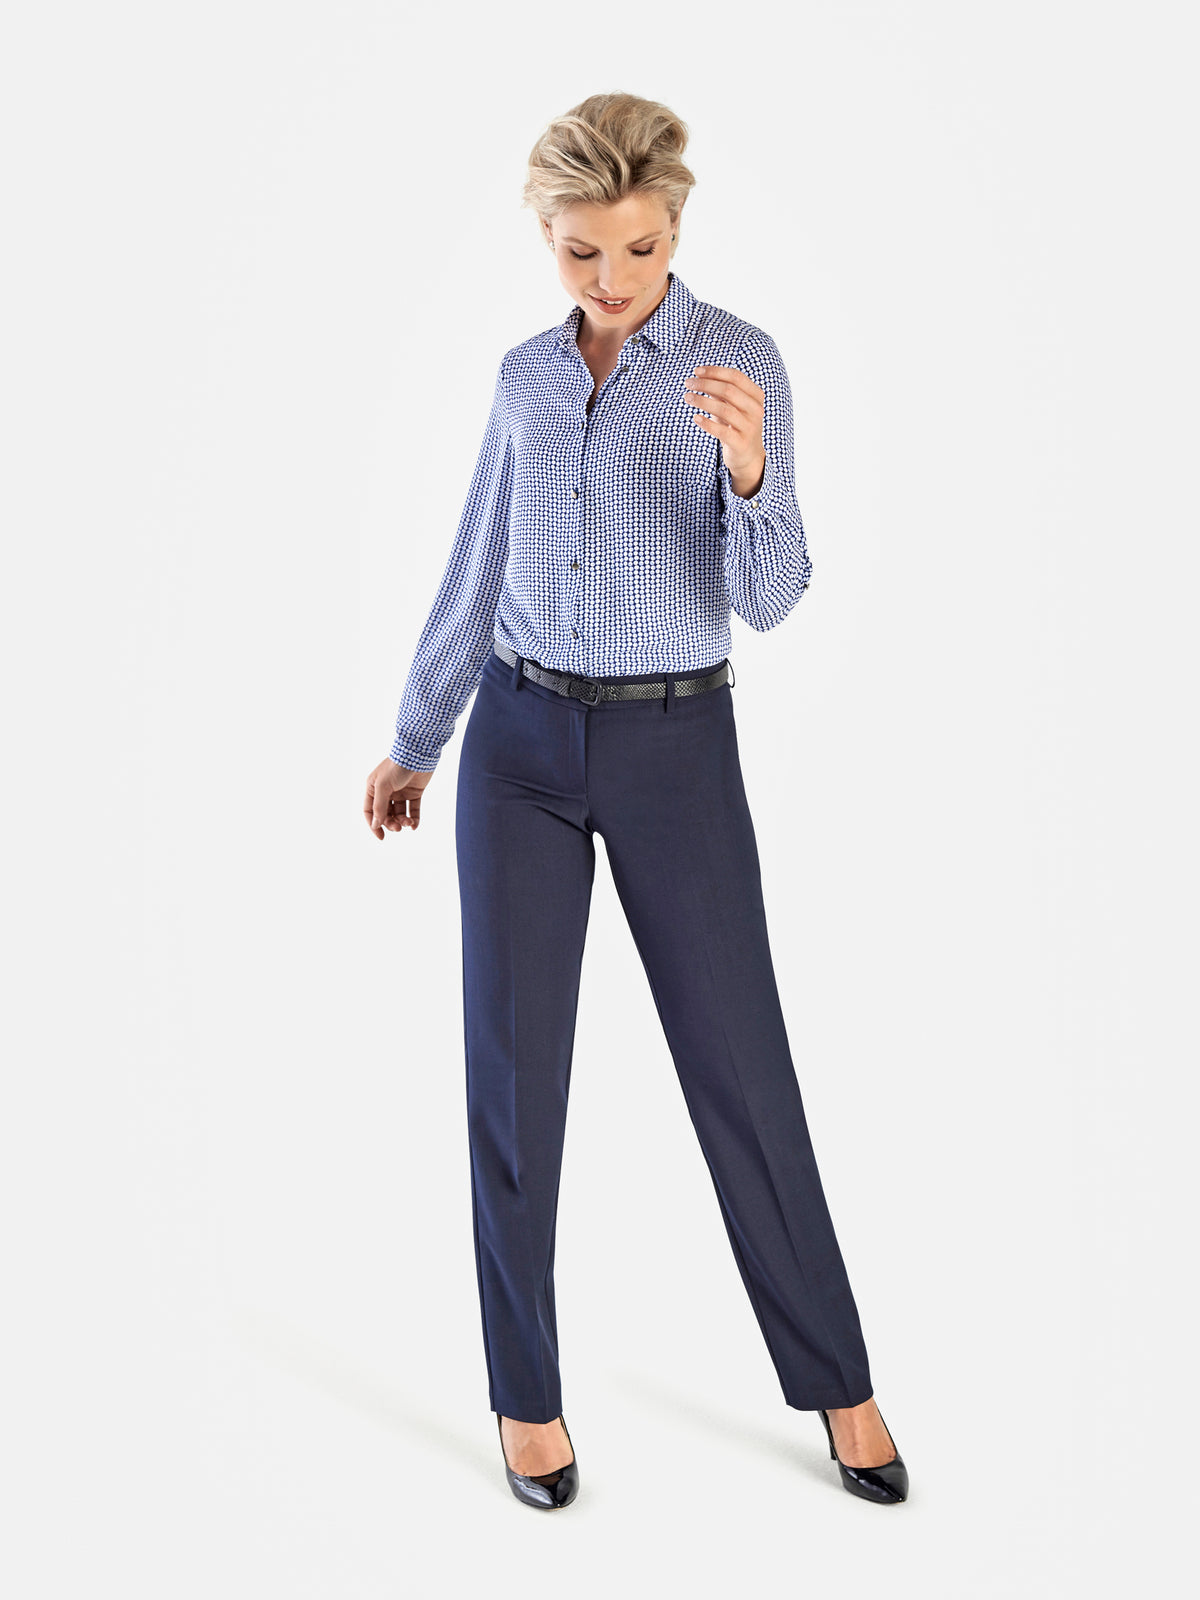 Cathy classic buttoned shirt - blue print